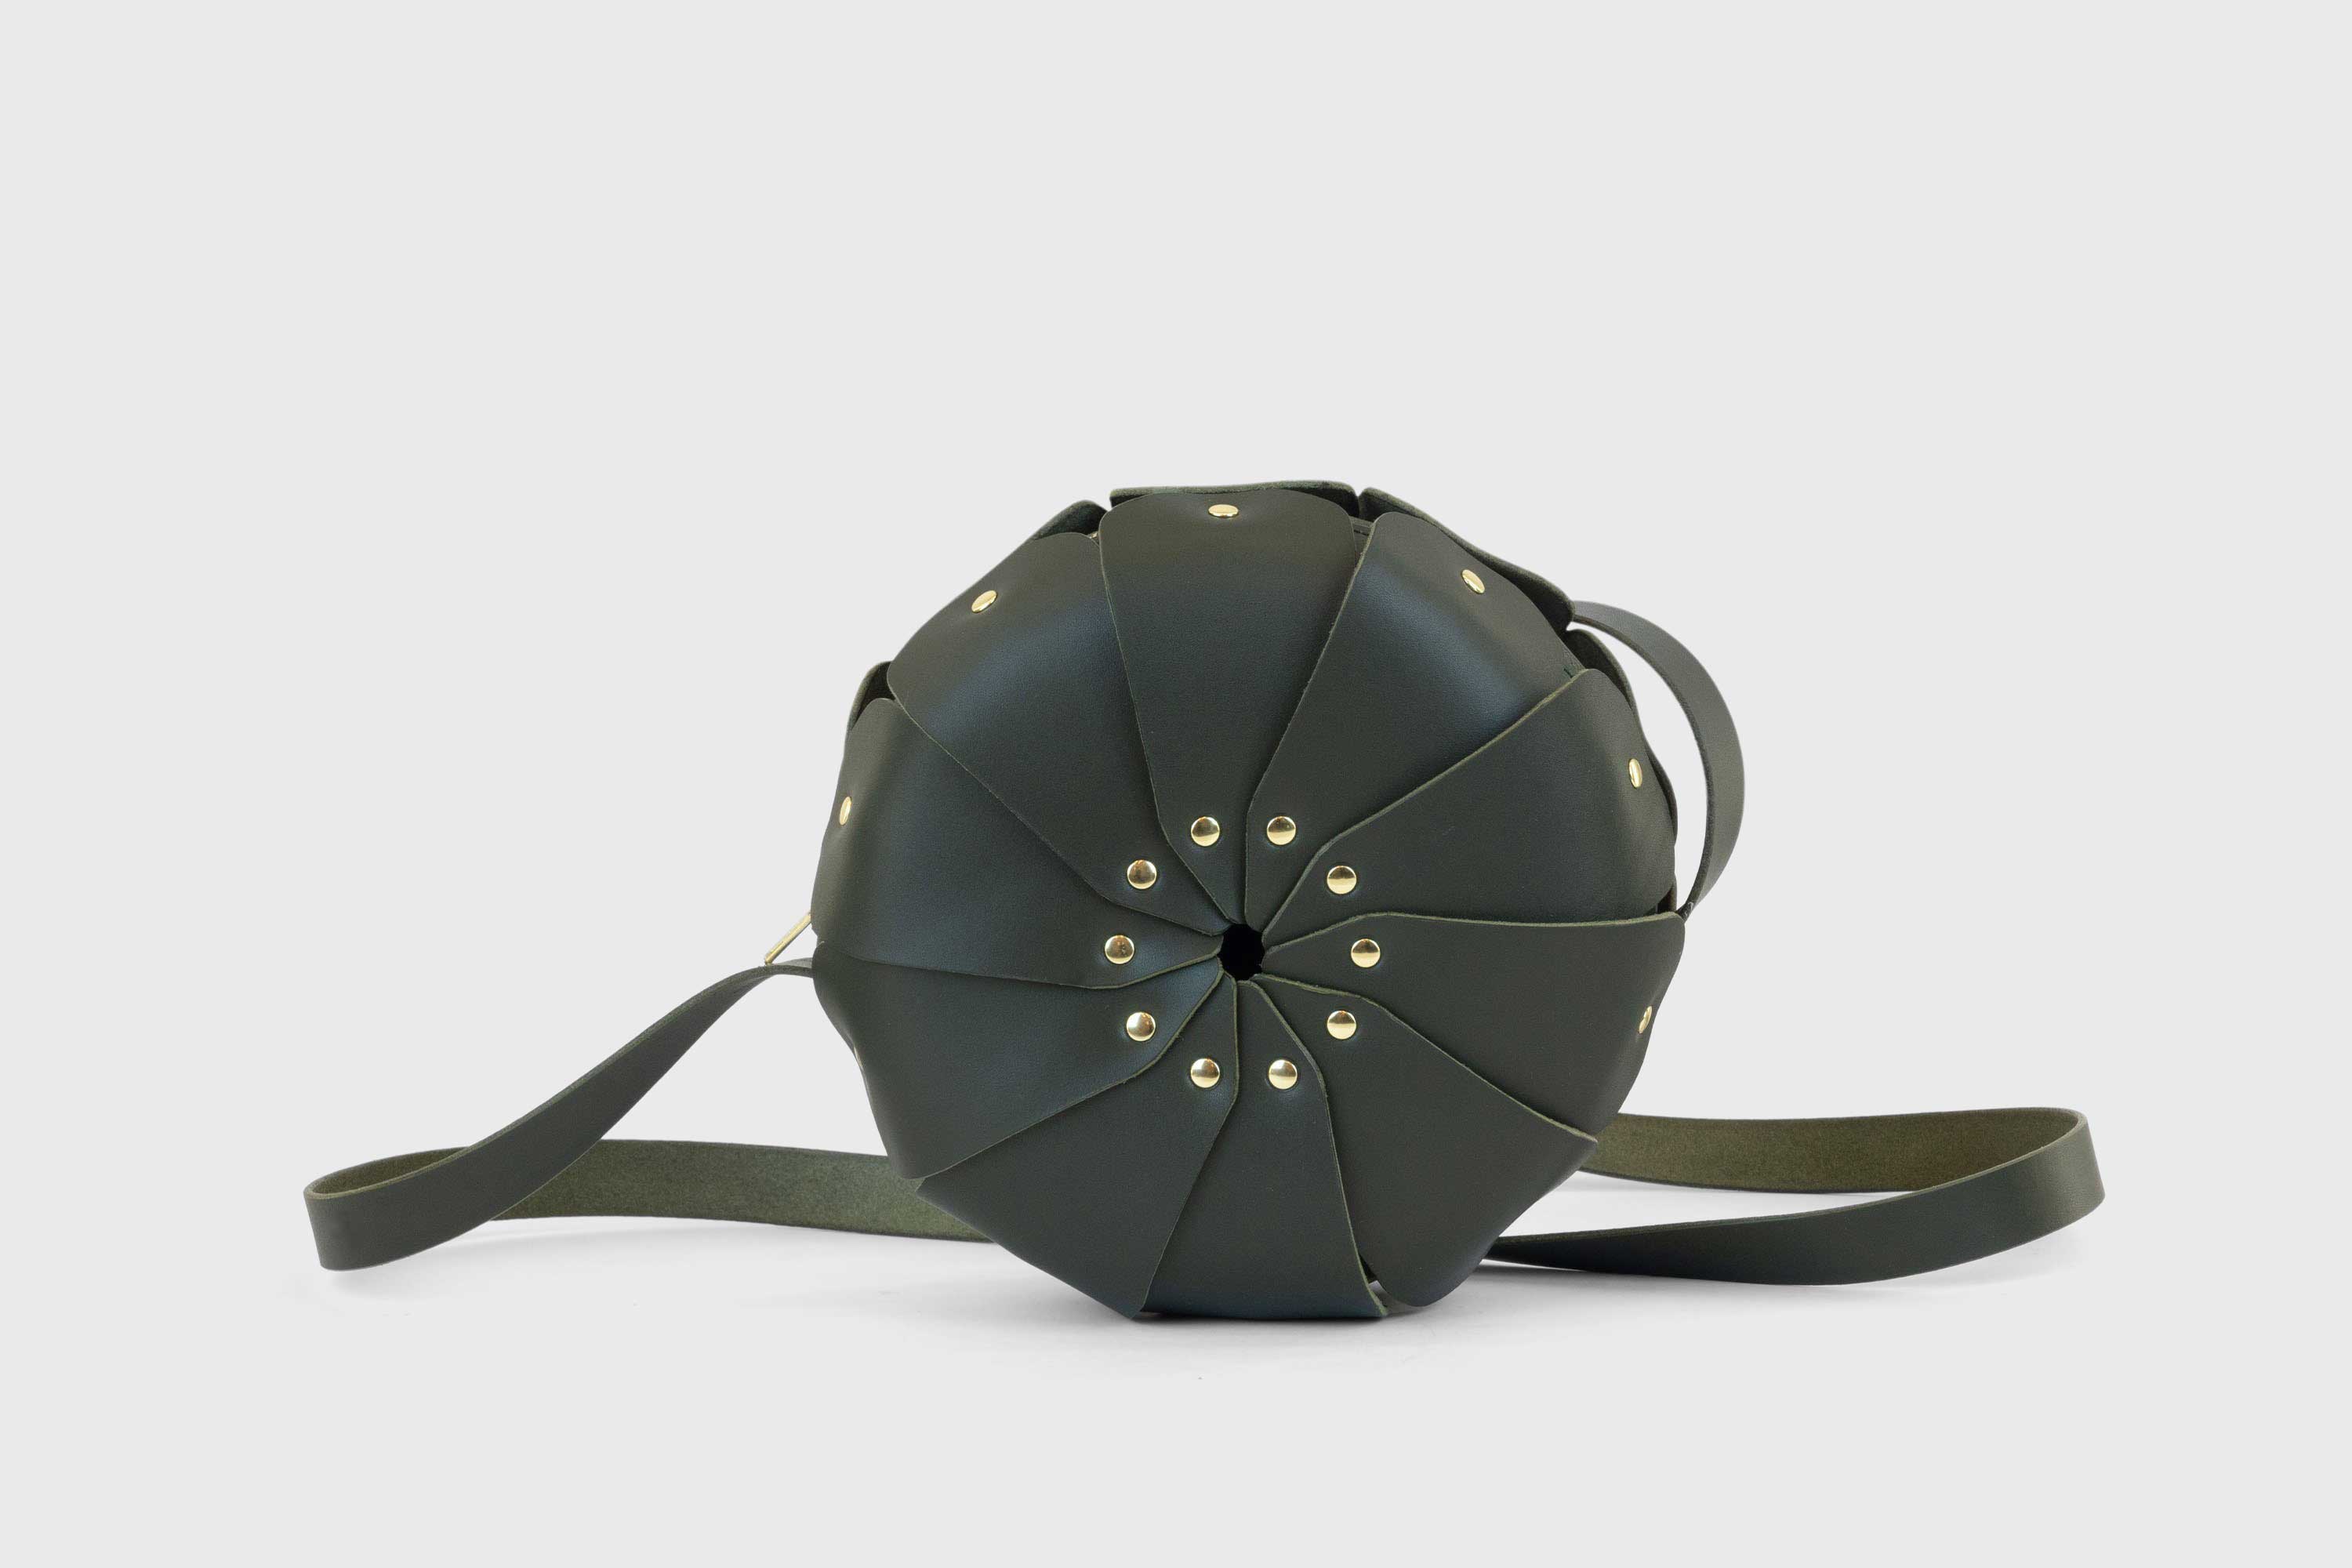 Anemo Leather Bag Front Olive Green Color Floral Design Premium Minimalist Modern Circle Round Pouch Crossbody Atelier Madre Manuel Dreesmann Barcelona